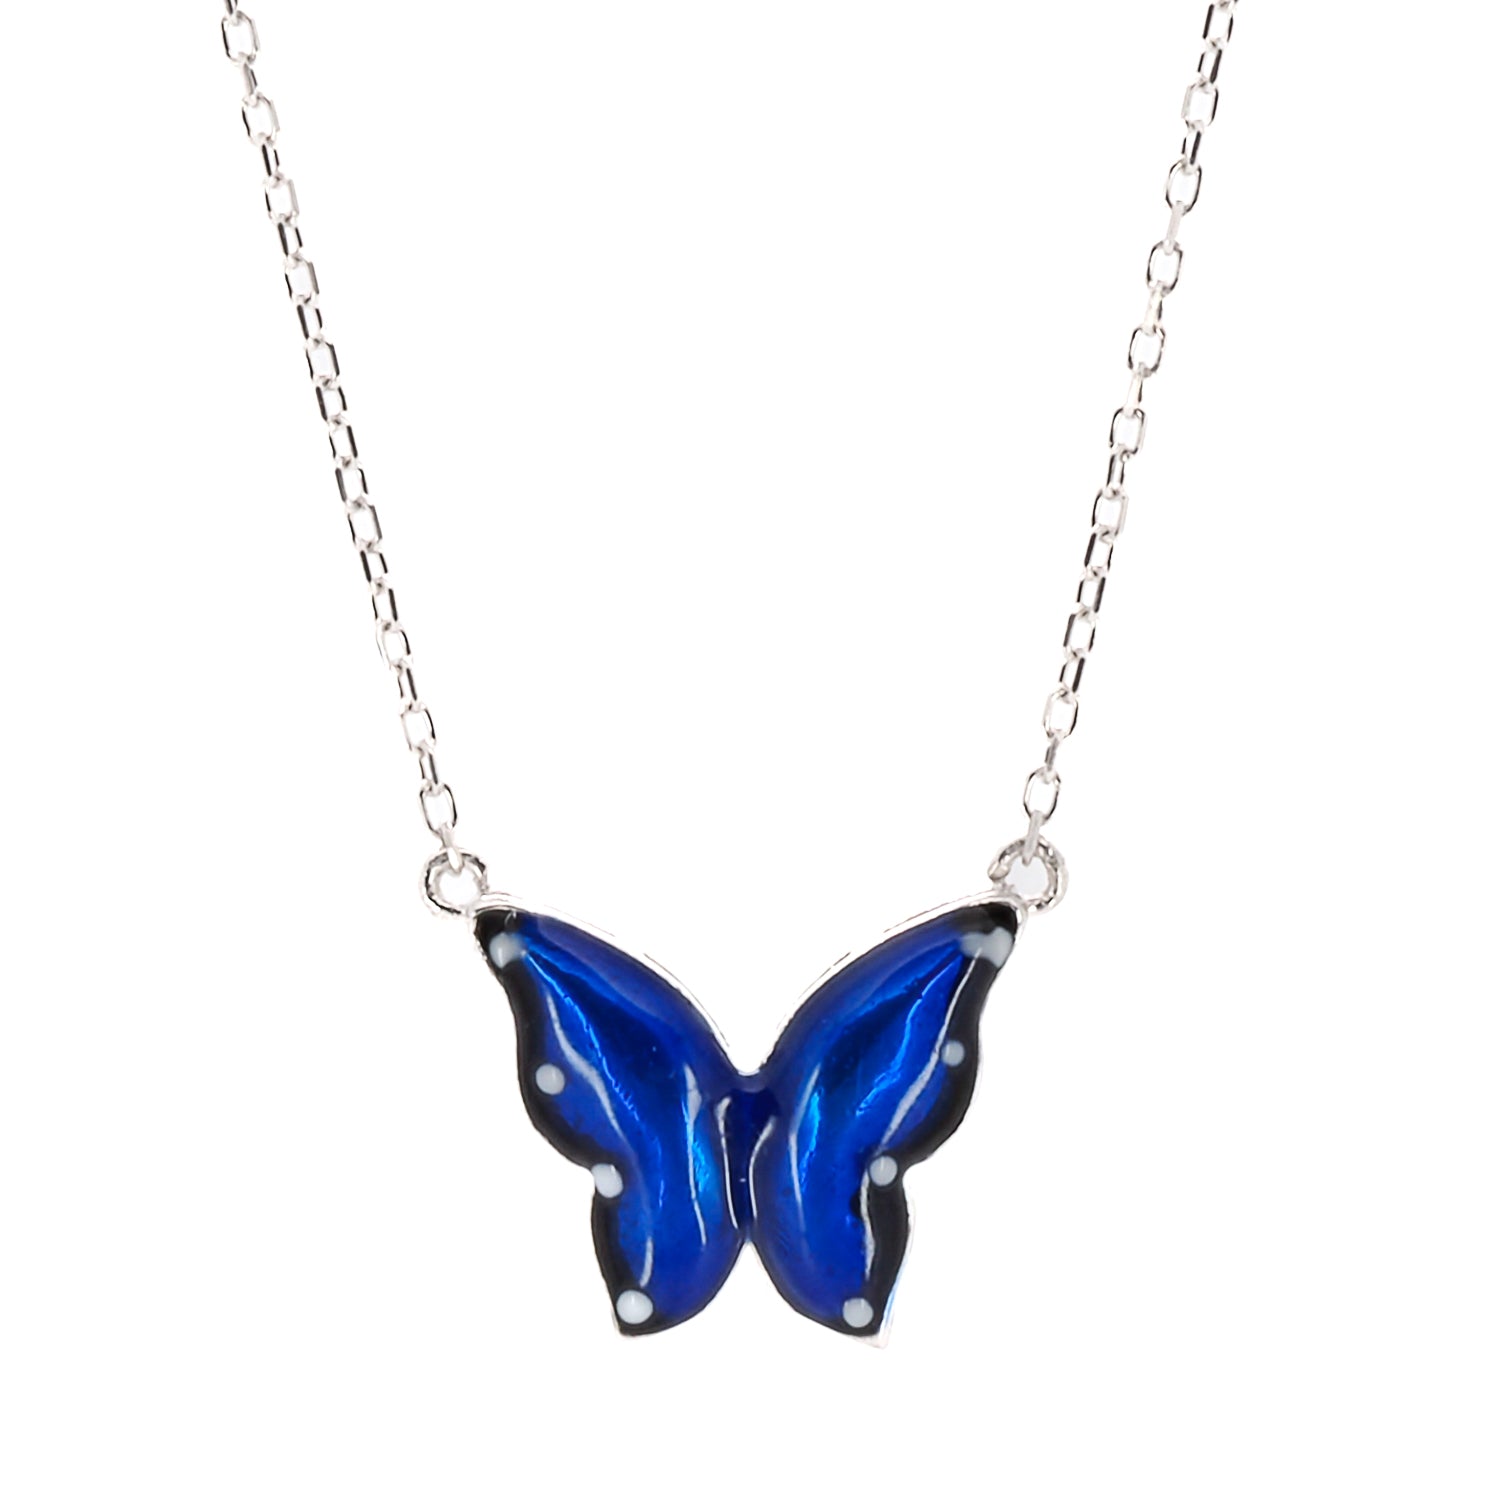 Silver Spiritual Blue Enamel Butterfly Necklace featuring a captivating butterfly pendant with blue enamel on a 925 sterling silver chain.